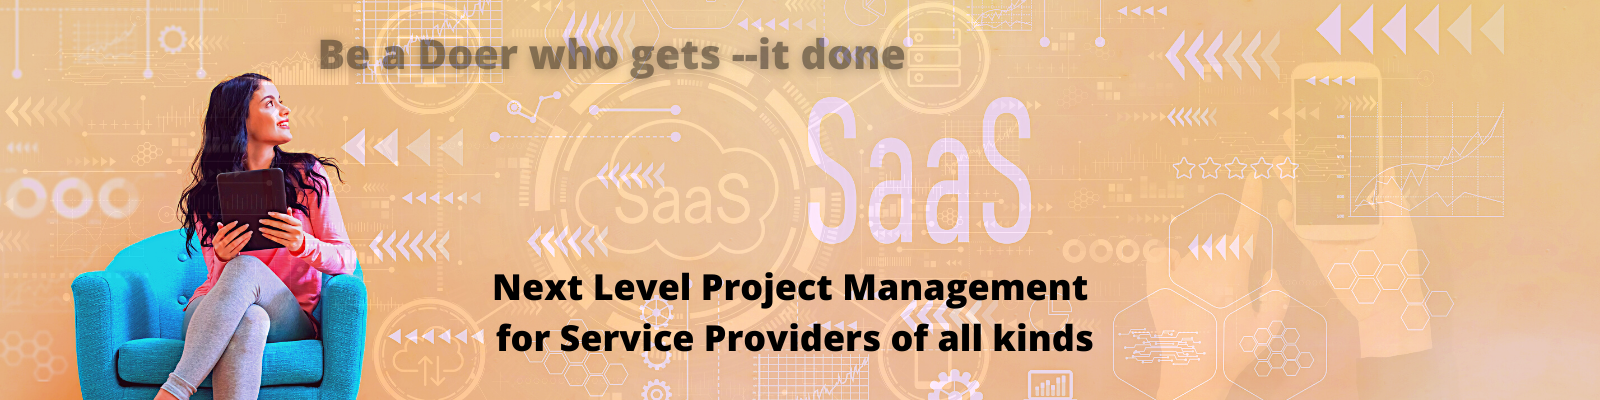 SaaS banner showing a variety of software options with a woman sitting in a chair reading the headline Be a Doer who gets --it done. Text at the bottom says Next level project management for service providers of all kinds